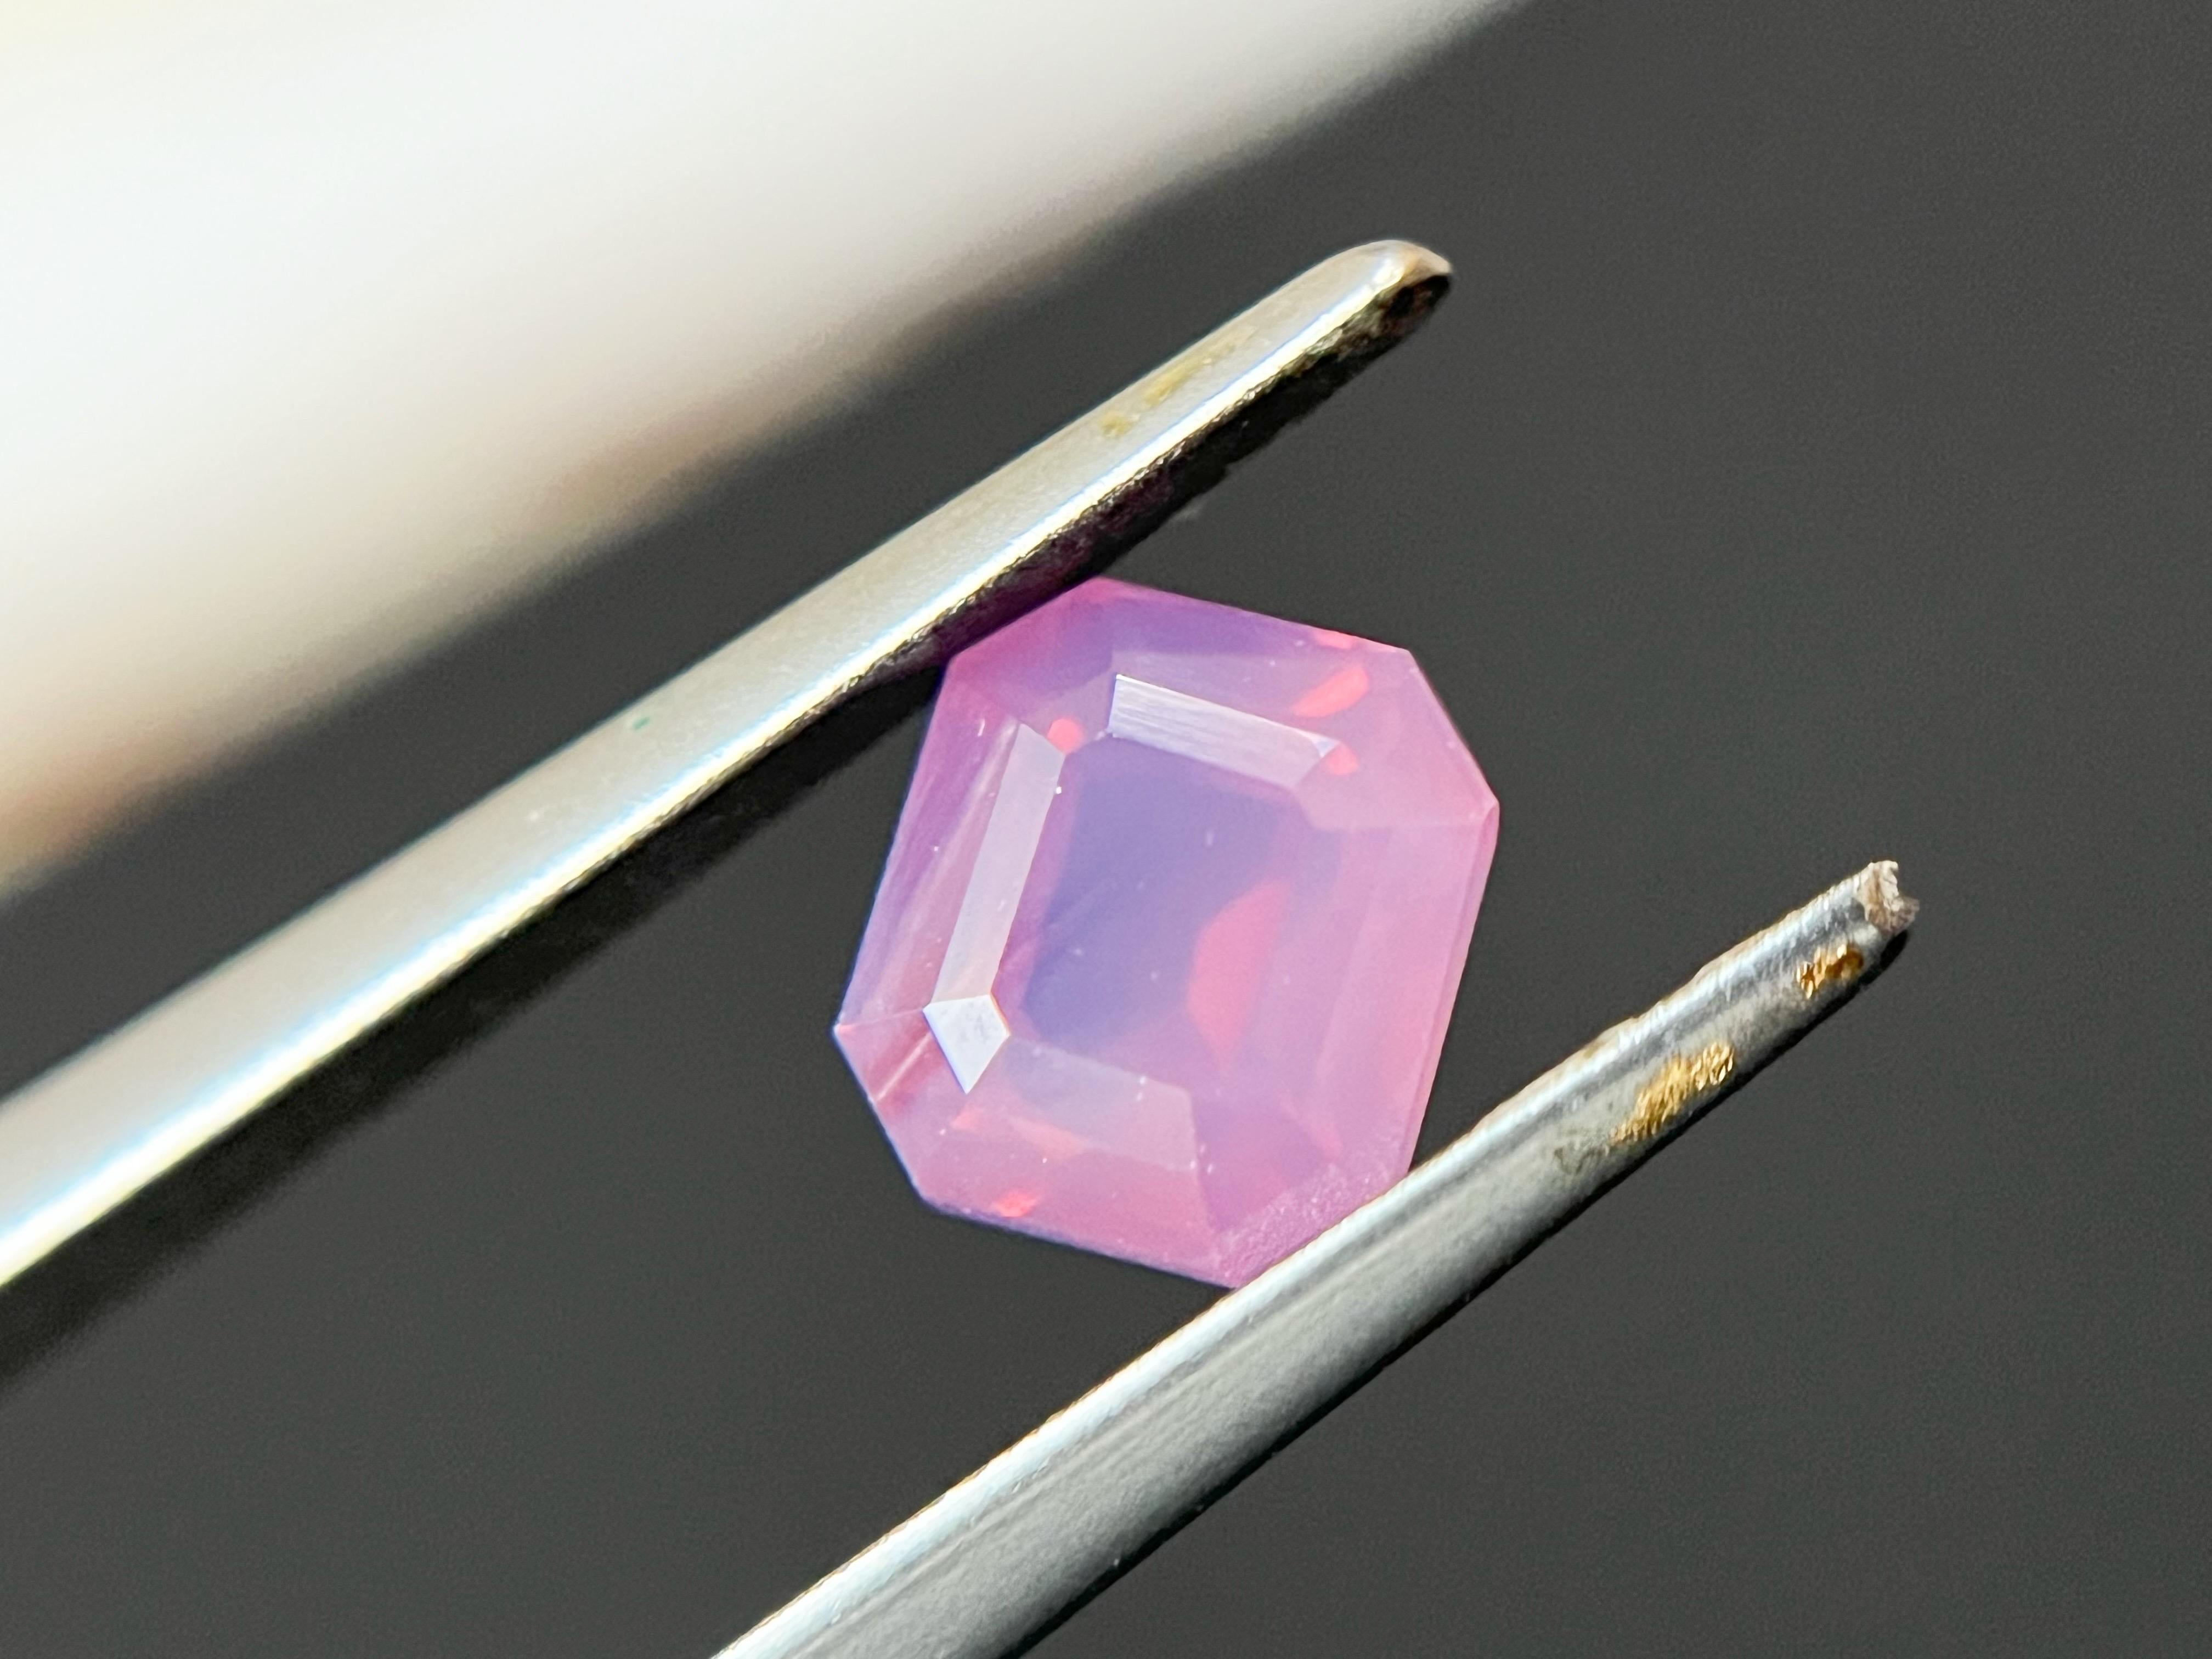 Introducing our stunning Mahenge spinel with a silky pinkish color that exudes sophistication and elegance. This gemstone is truly a marvel of nature, with its soft and delicate hue reminiscent of a sakura petal.

Sourced from the renowned Mahenge